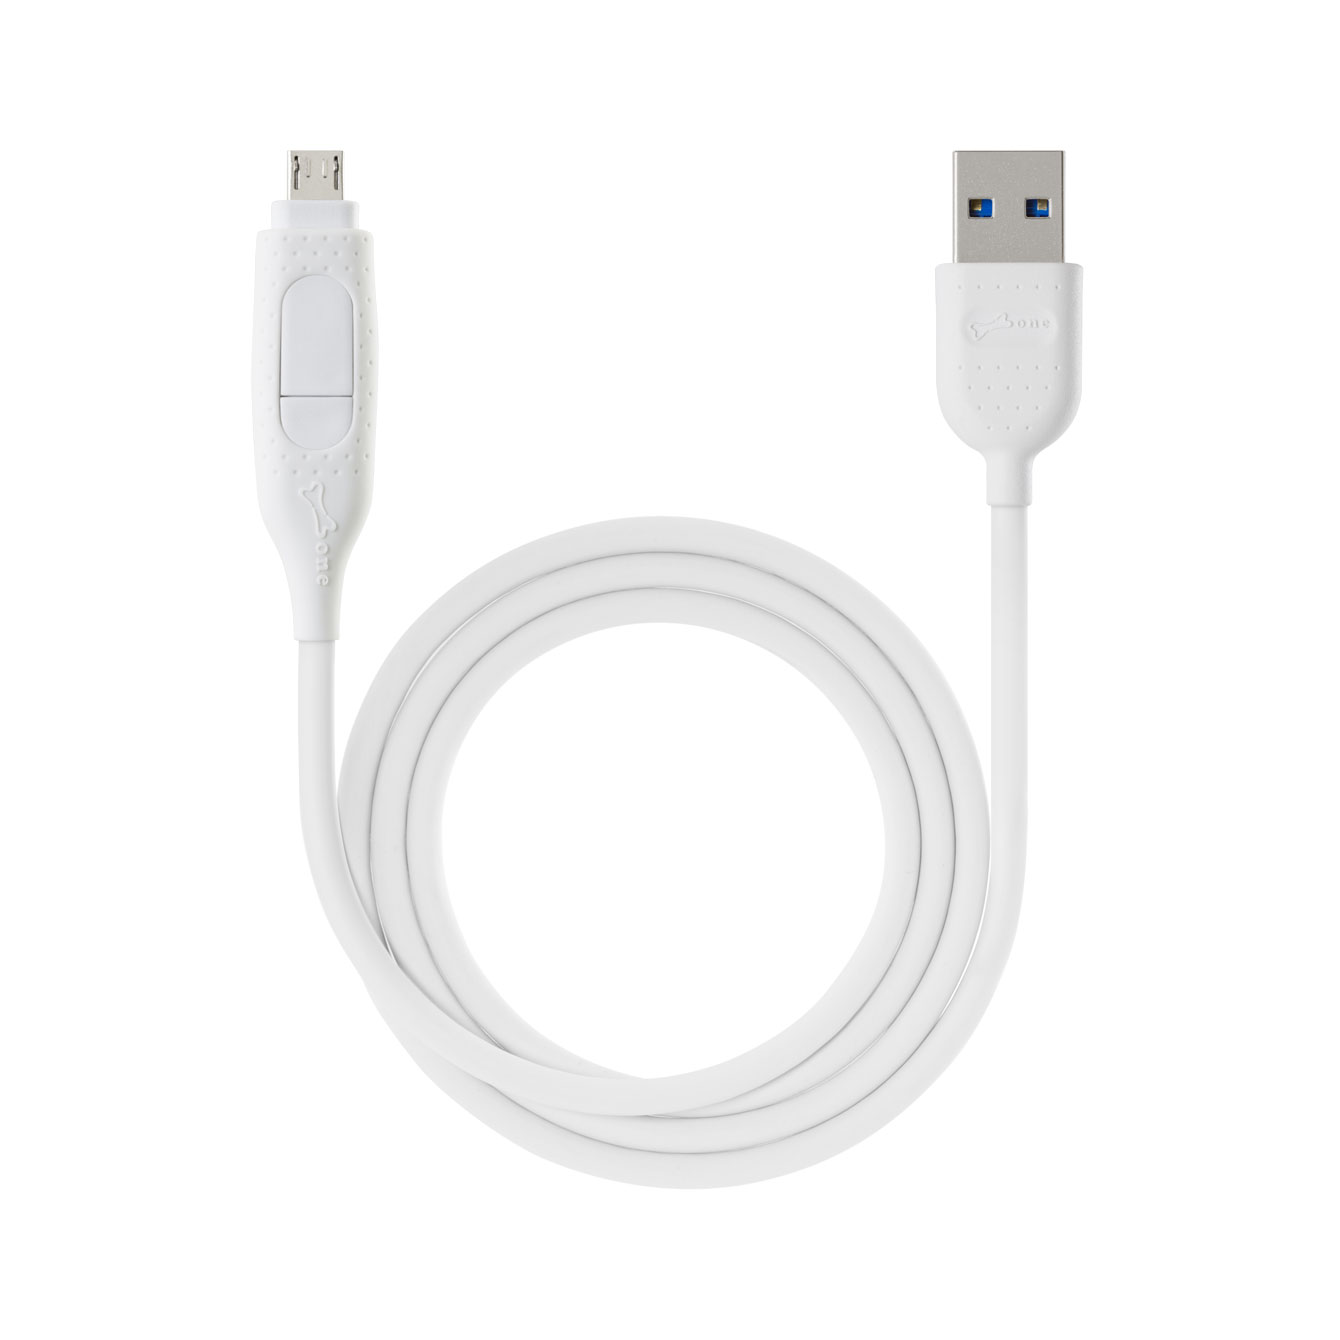 Skating Penguin Square Three-in-One Data Cable A Necessary Data Cable for Home and Car Travel 